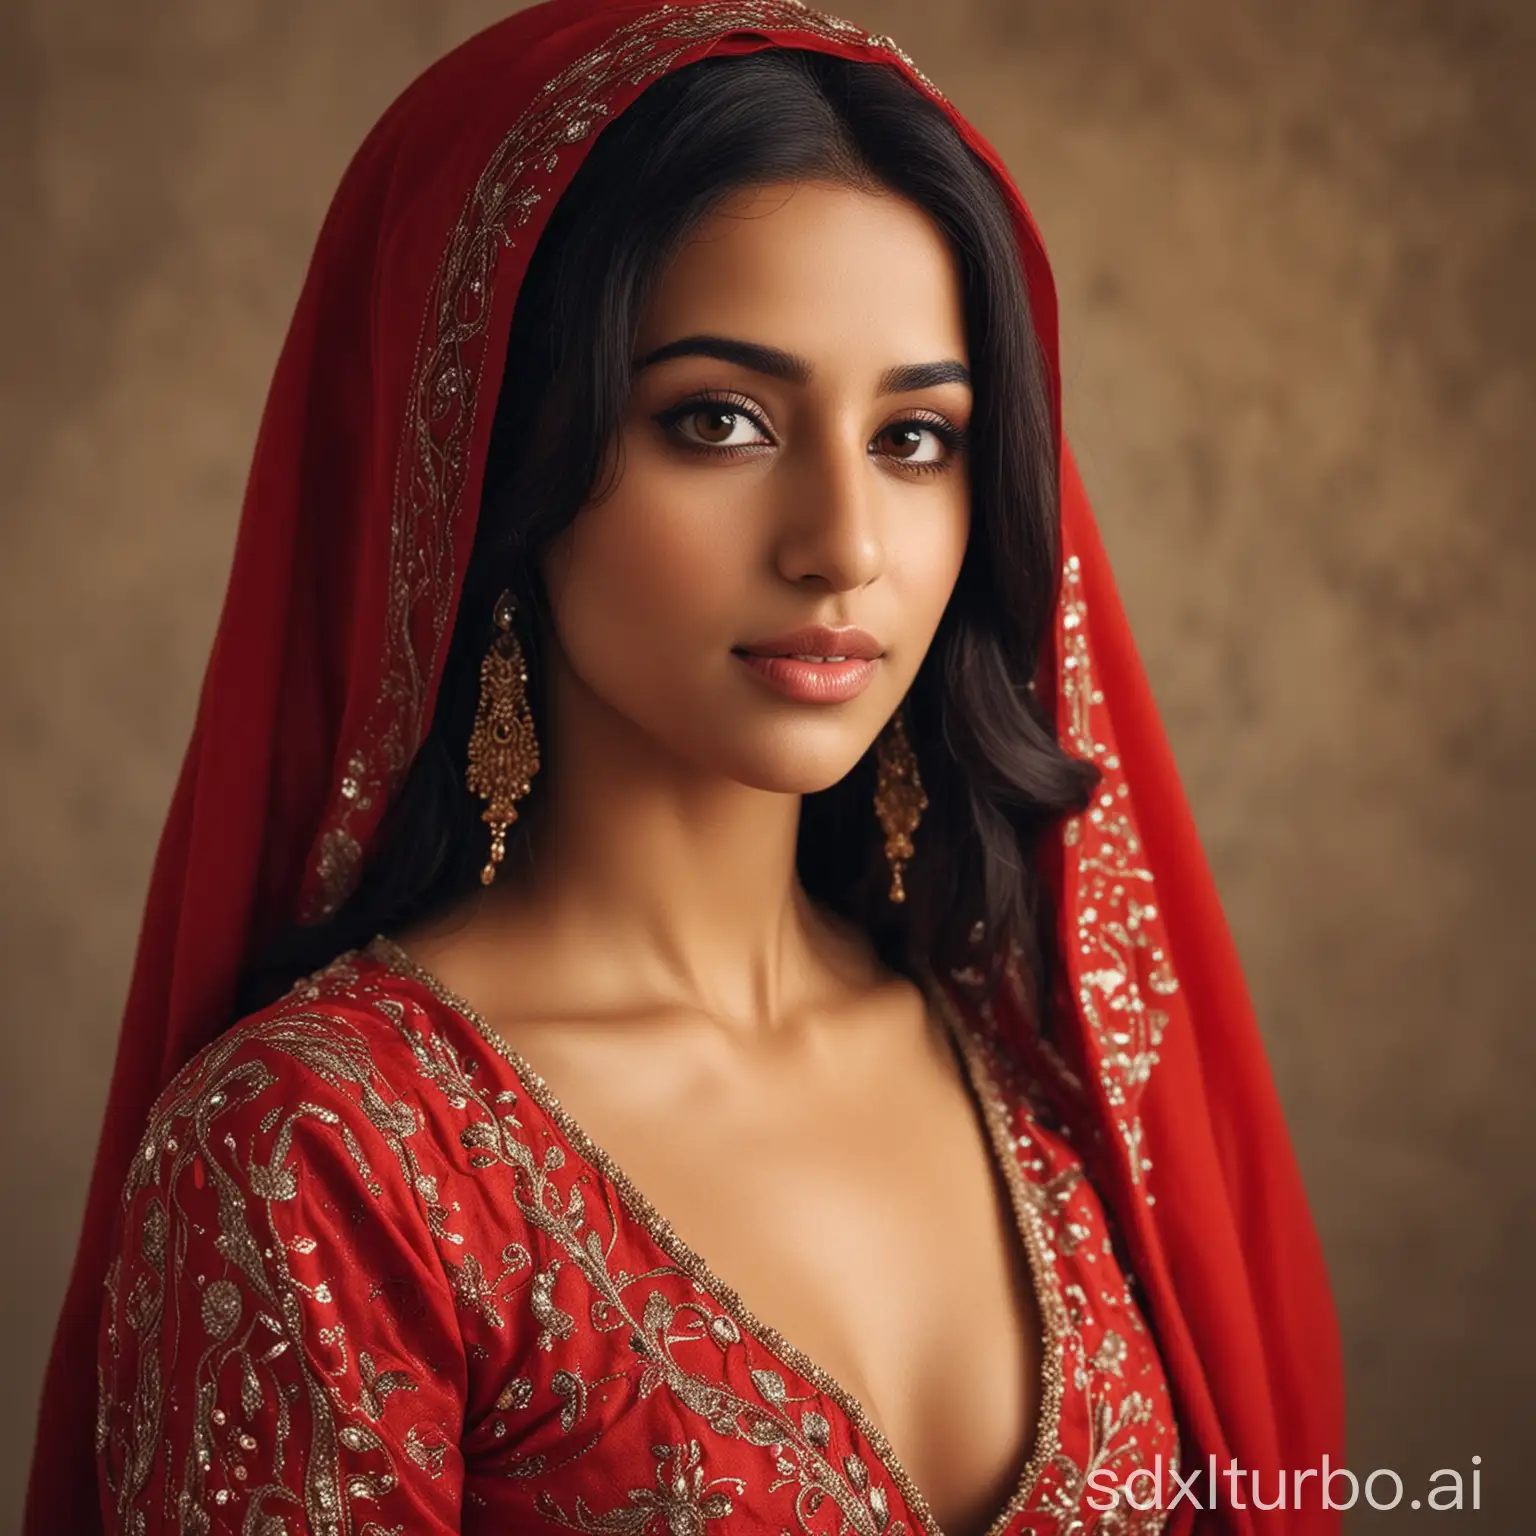 a woman with Arabian features wears a red dress